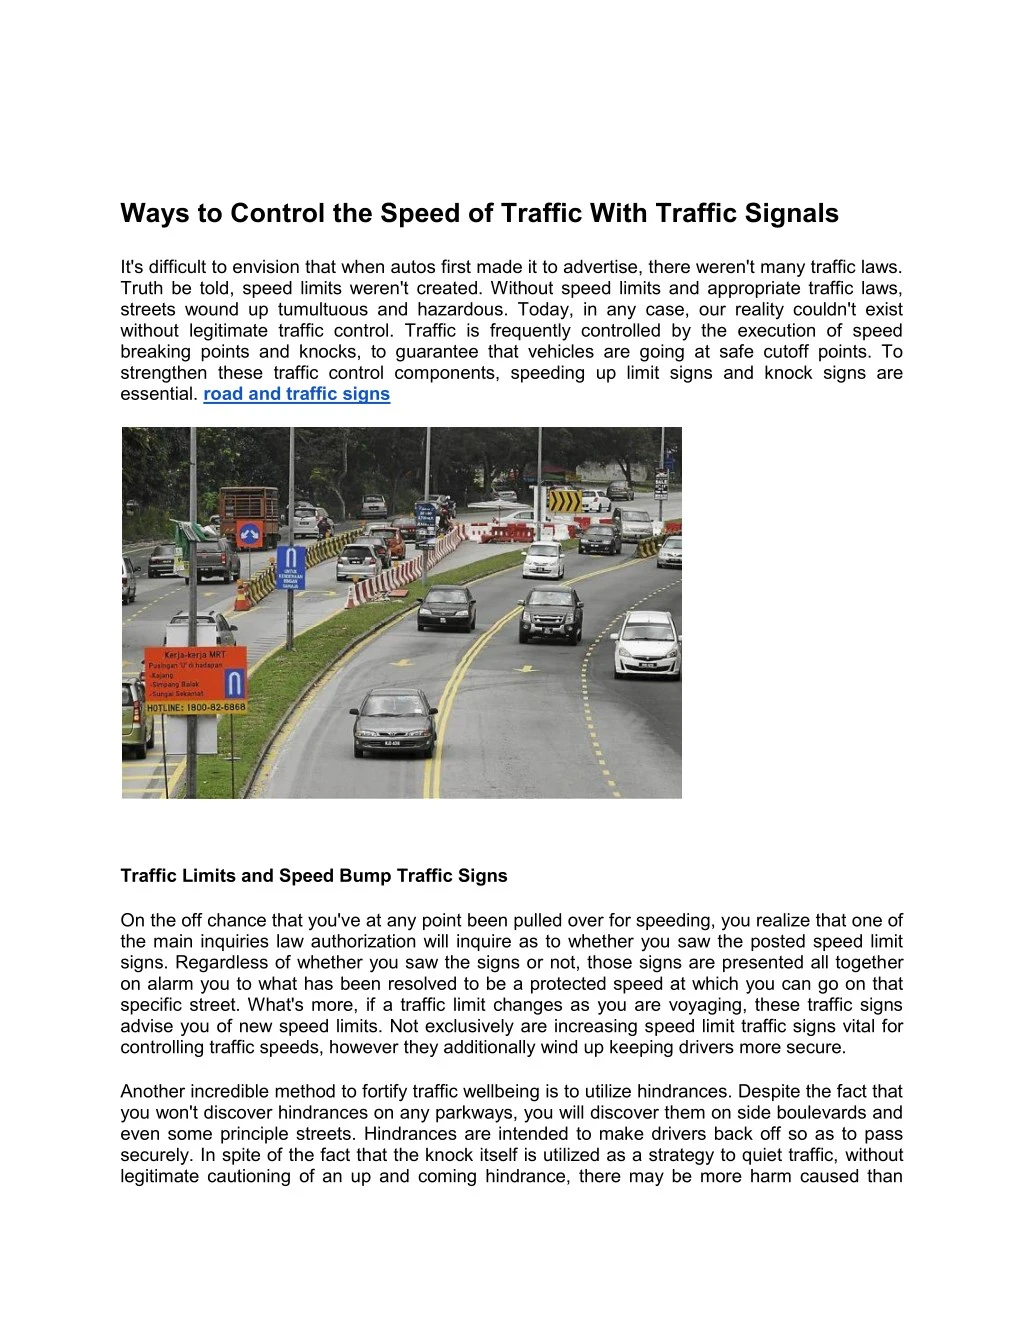 ways to control the speed of traffic with traffic